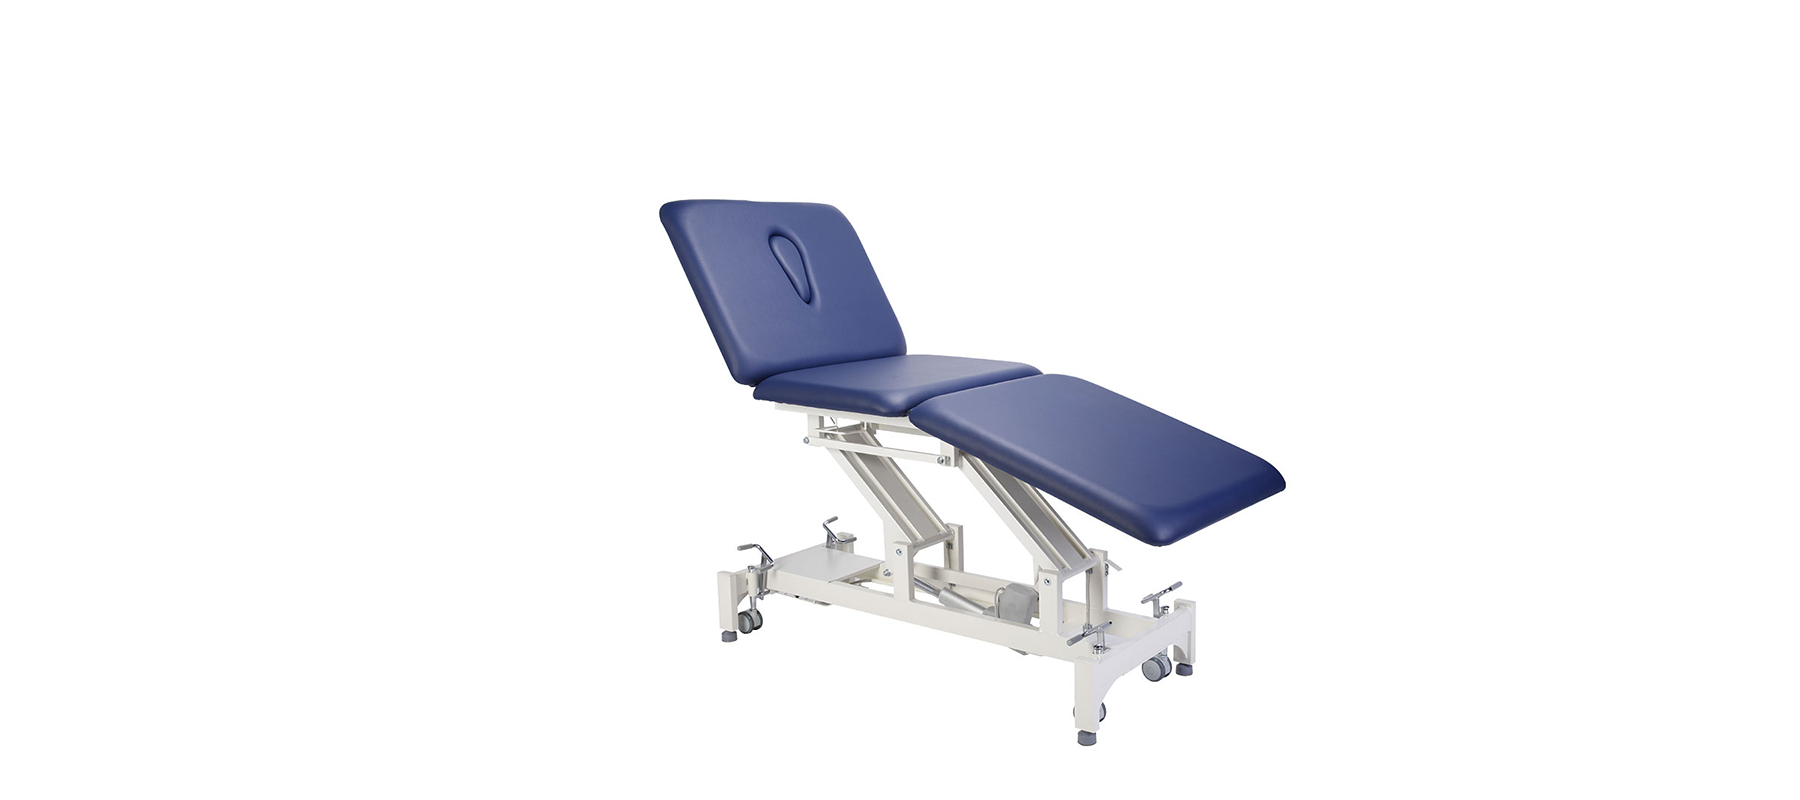 Bariatric Tables